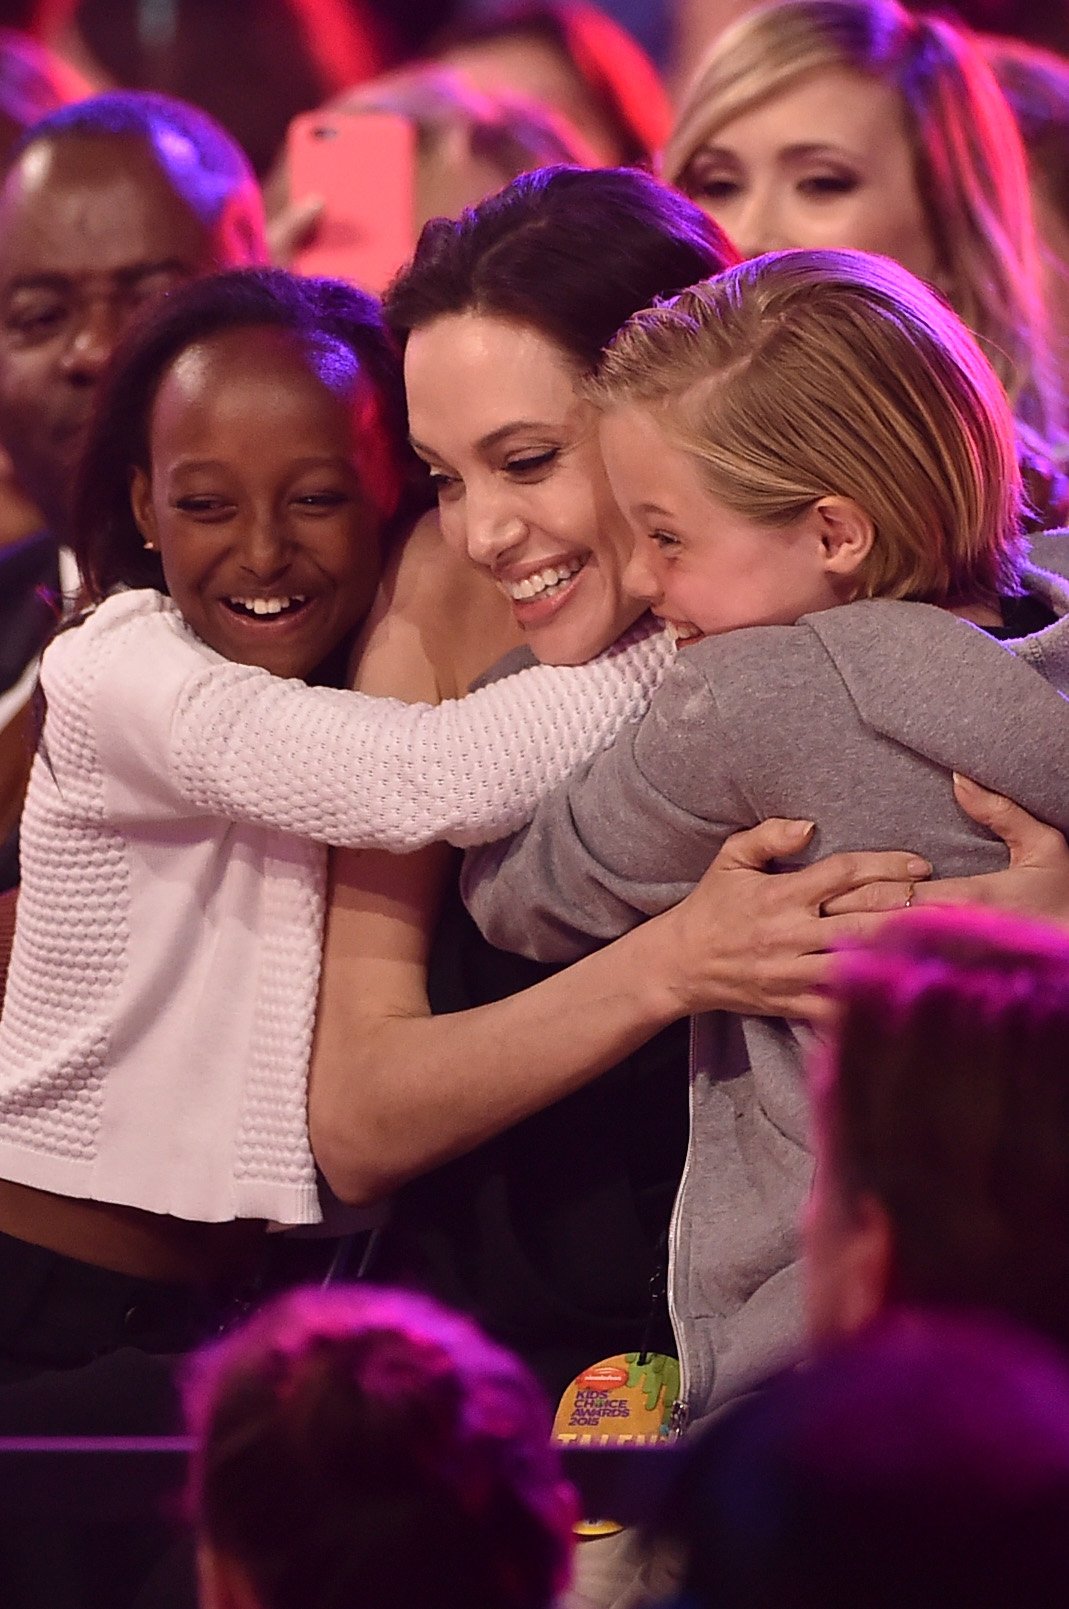  Actress Angelina Jolie hugs Zahara Marley Jolie-Pitt (L) and Shiloh Nouvel Jolie-Pitt (R) after winning award for Favorite Villain in 'Maleficent' during Nickelodeon's 28th Annual Kids' Choice Awards held at The Forum on March 28, 2015 in Inglewood, California | Source: Getty Images